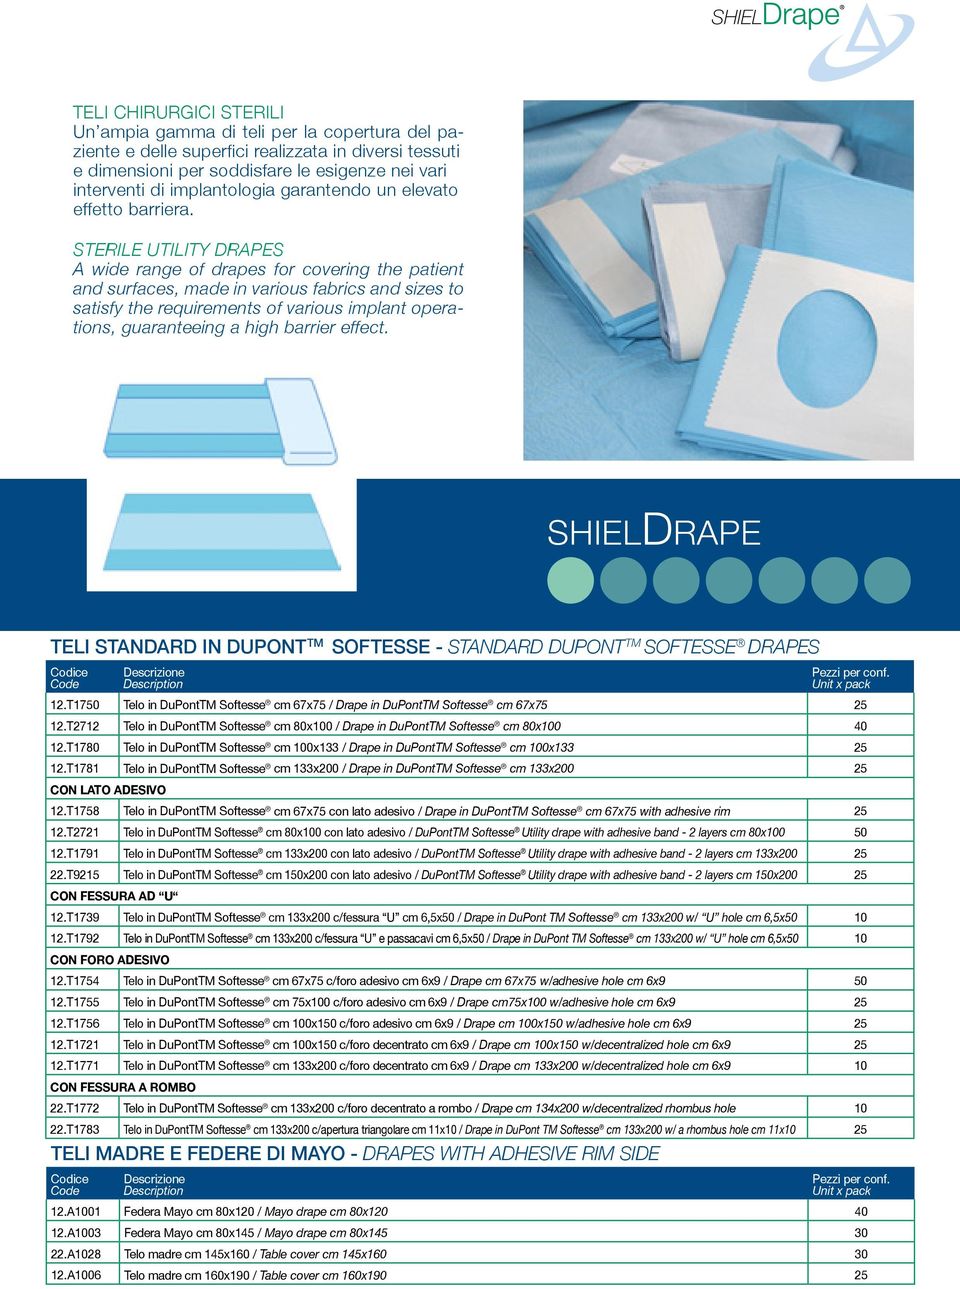 Sterile utility drapes A wide range of drapes for covering the patient and surfaces, made in various fabrics and sizes to satisfy the requirements of various implant operations, guaranteeing a high